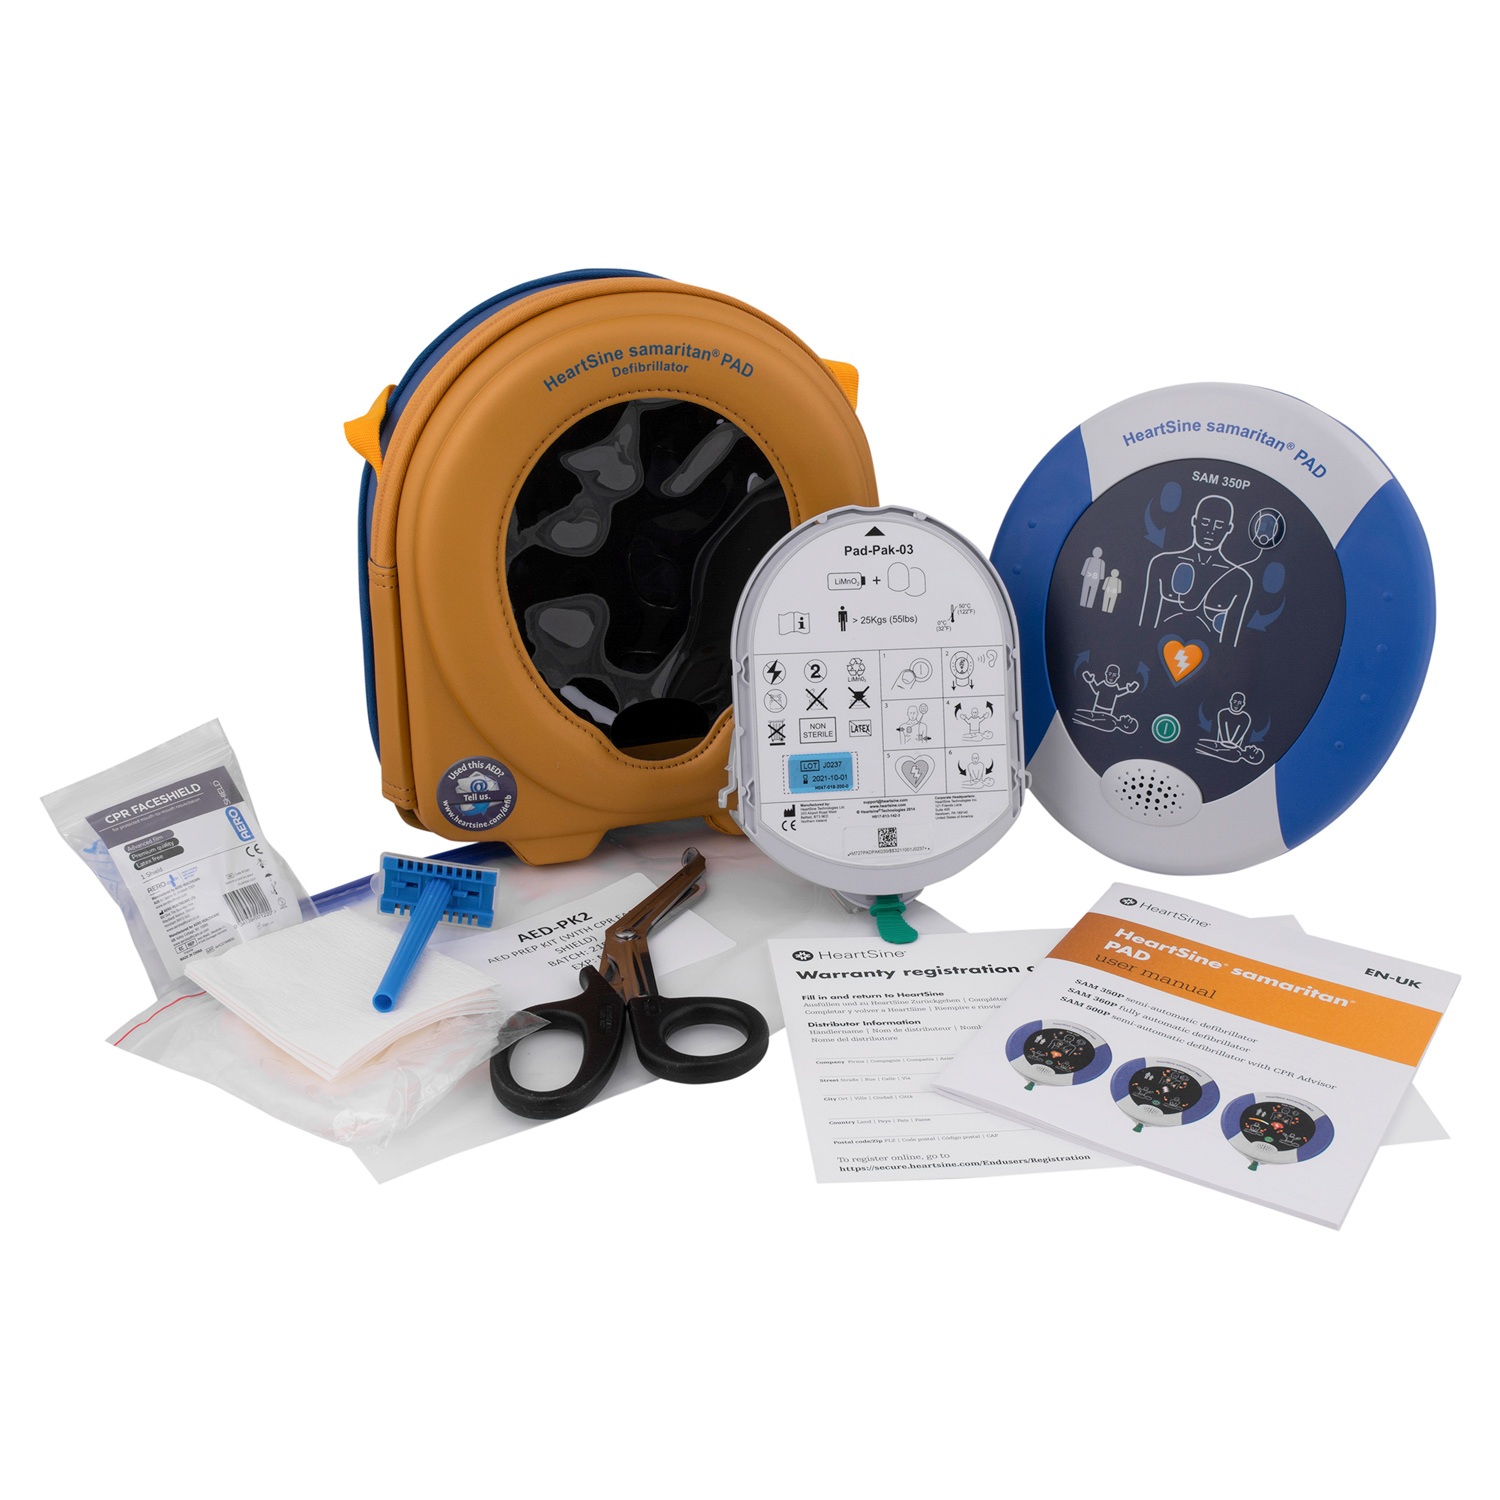 All essential components are included as standard with HeartSine Samaritan PAD units